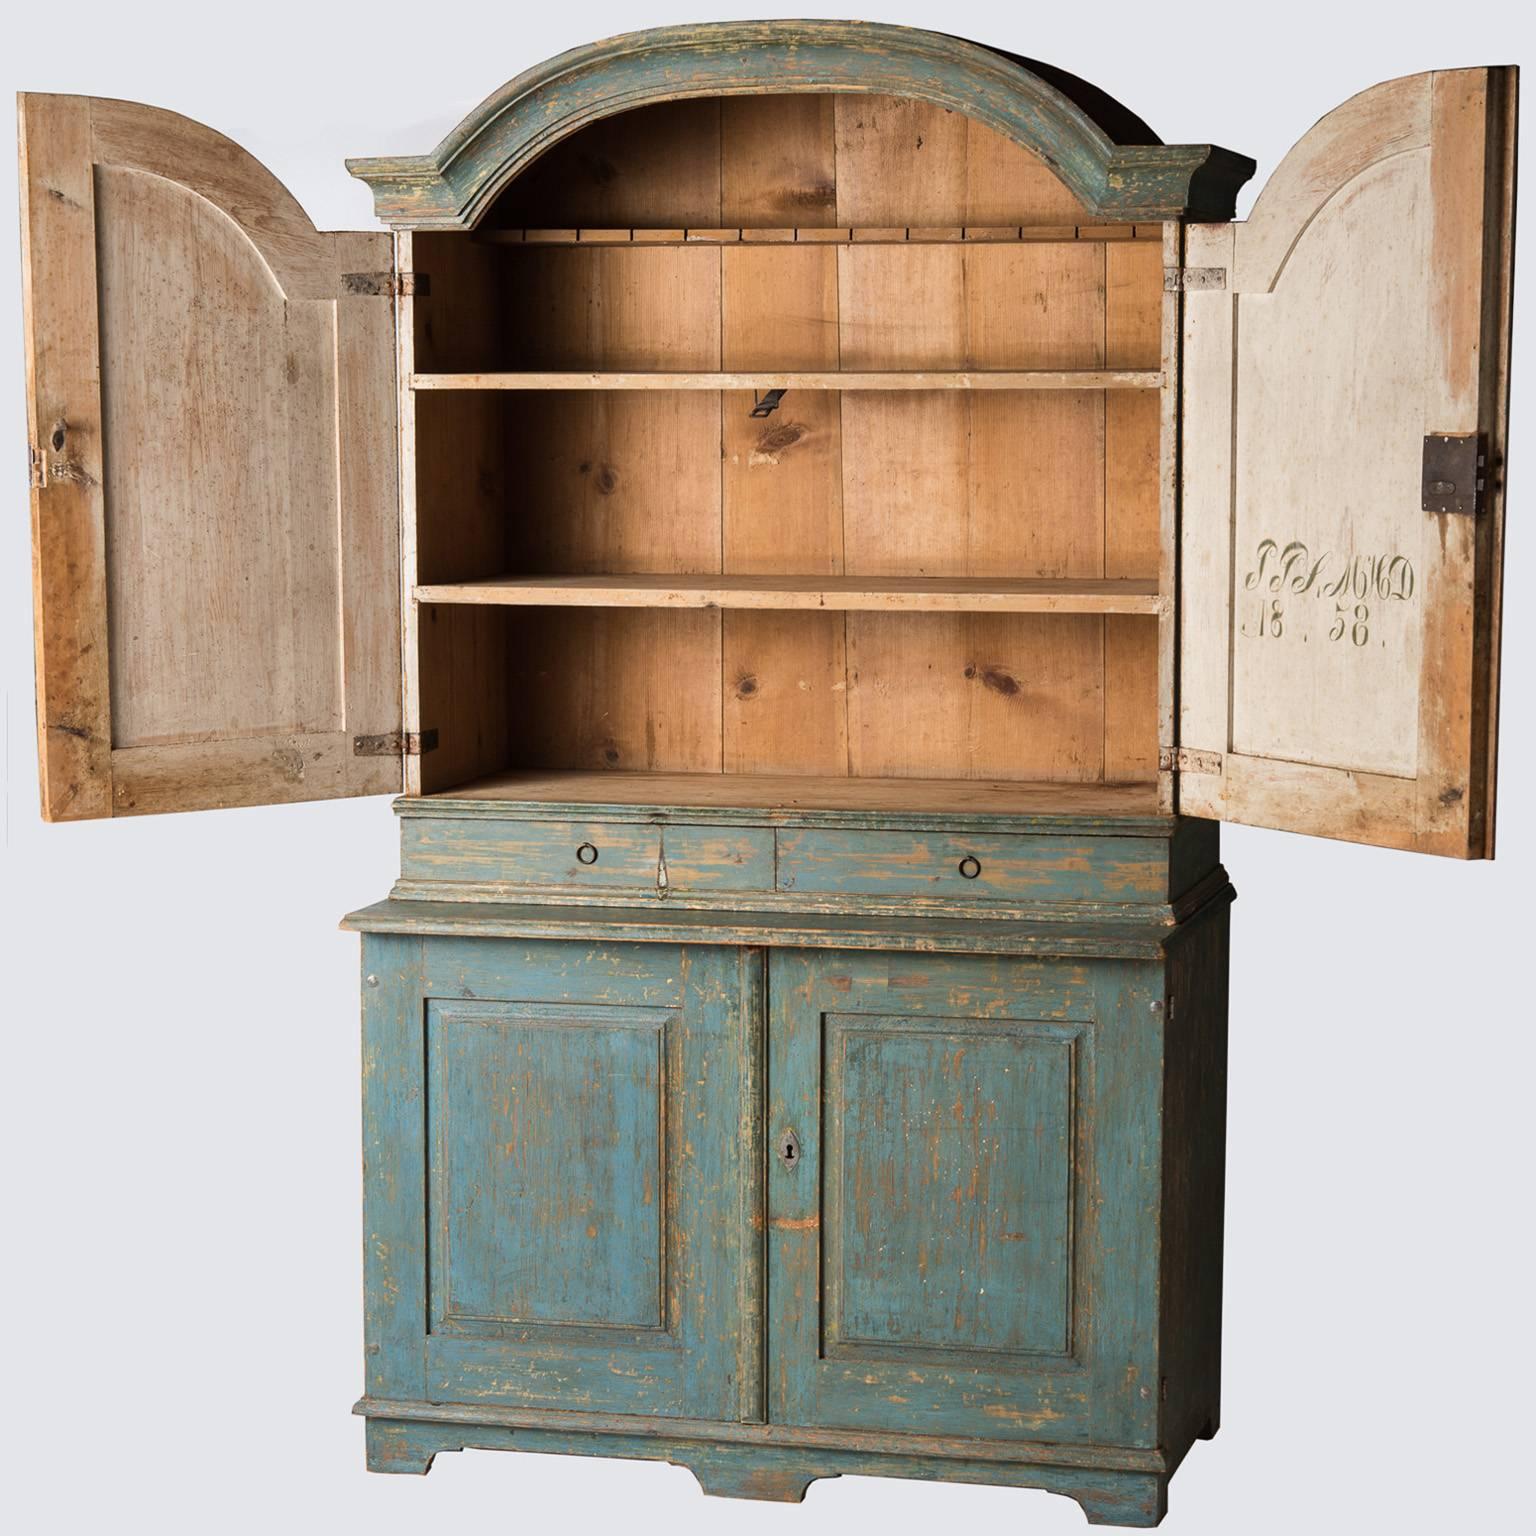 This important cupboard in the Rococo style retains the original blue paint throughout. It has three interior shelves, perfect for storing collections of bowls or china. There are two convenient drawers that could be perfect for silverware and two